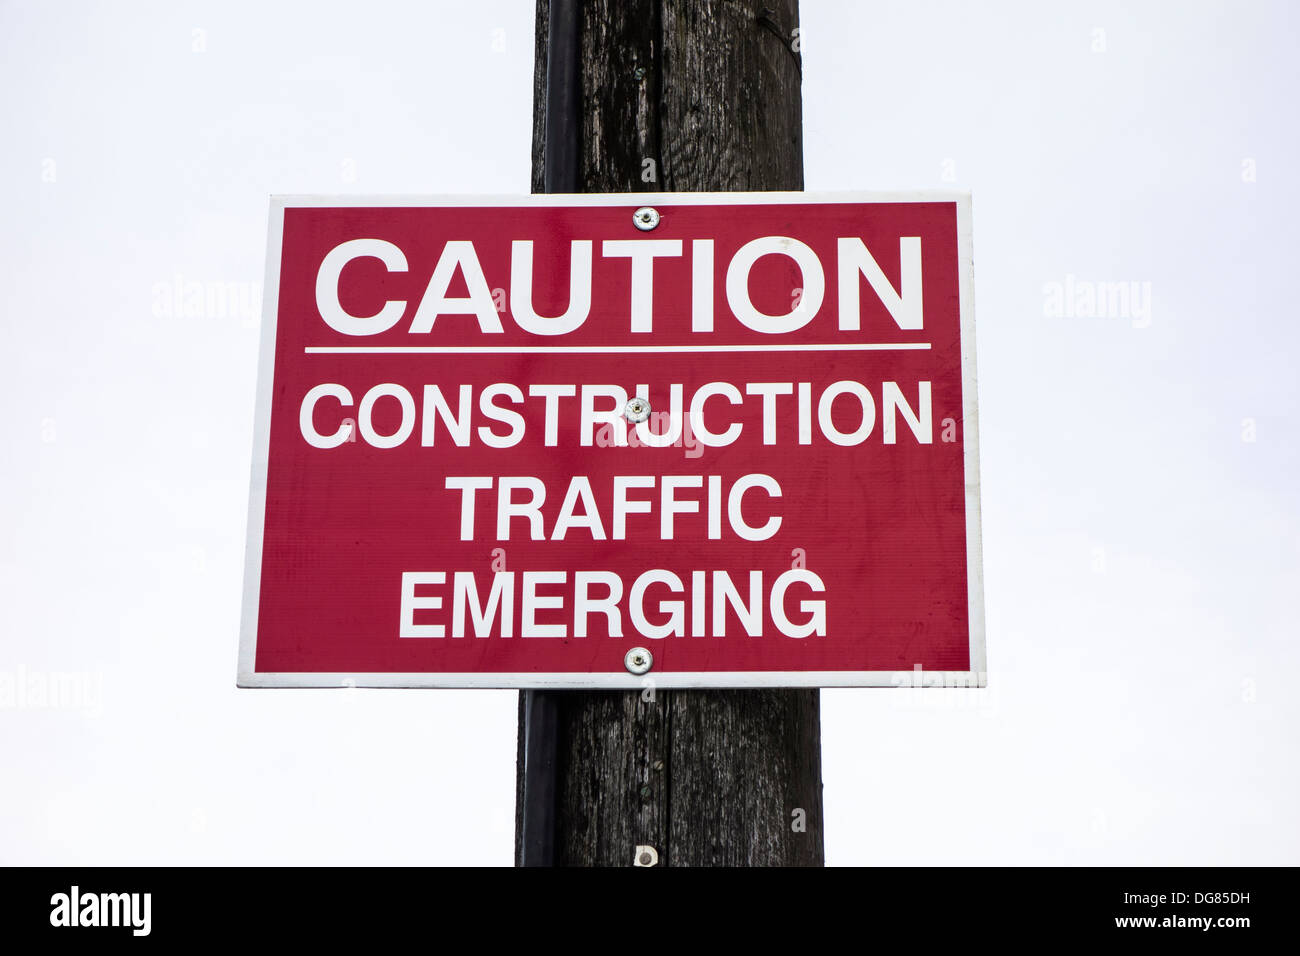 A sign  / notice on a pole - Caution, Construction traffic emerging Stock Photo